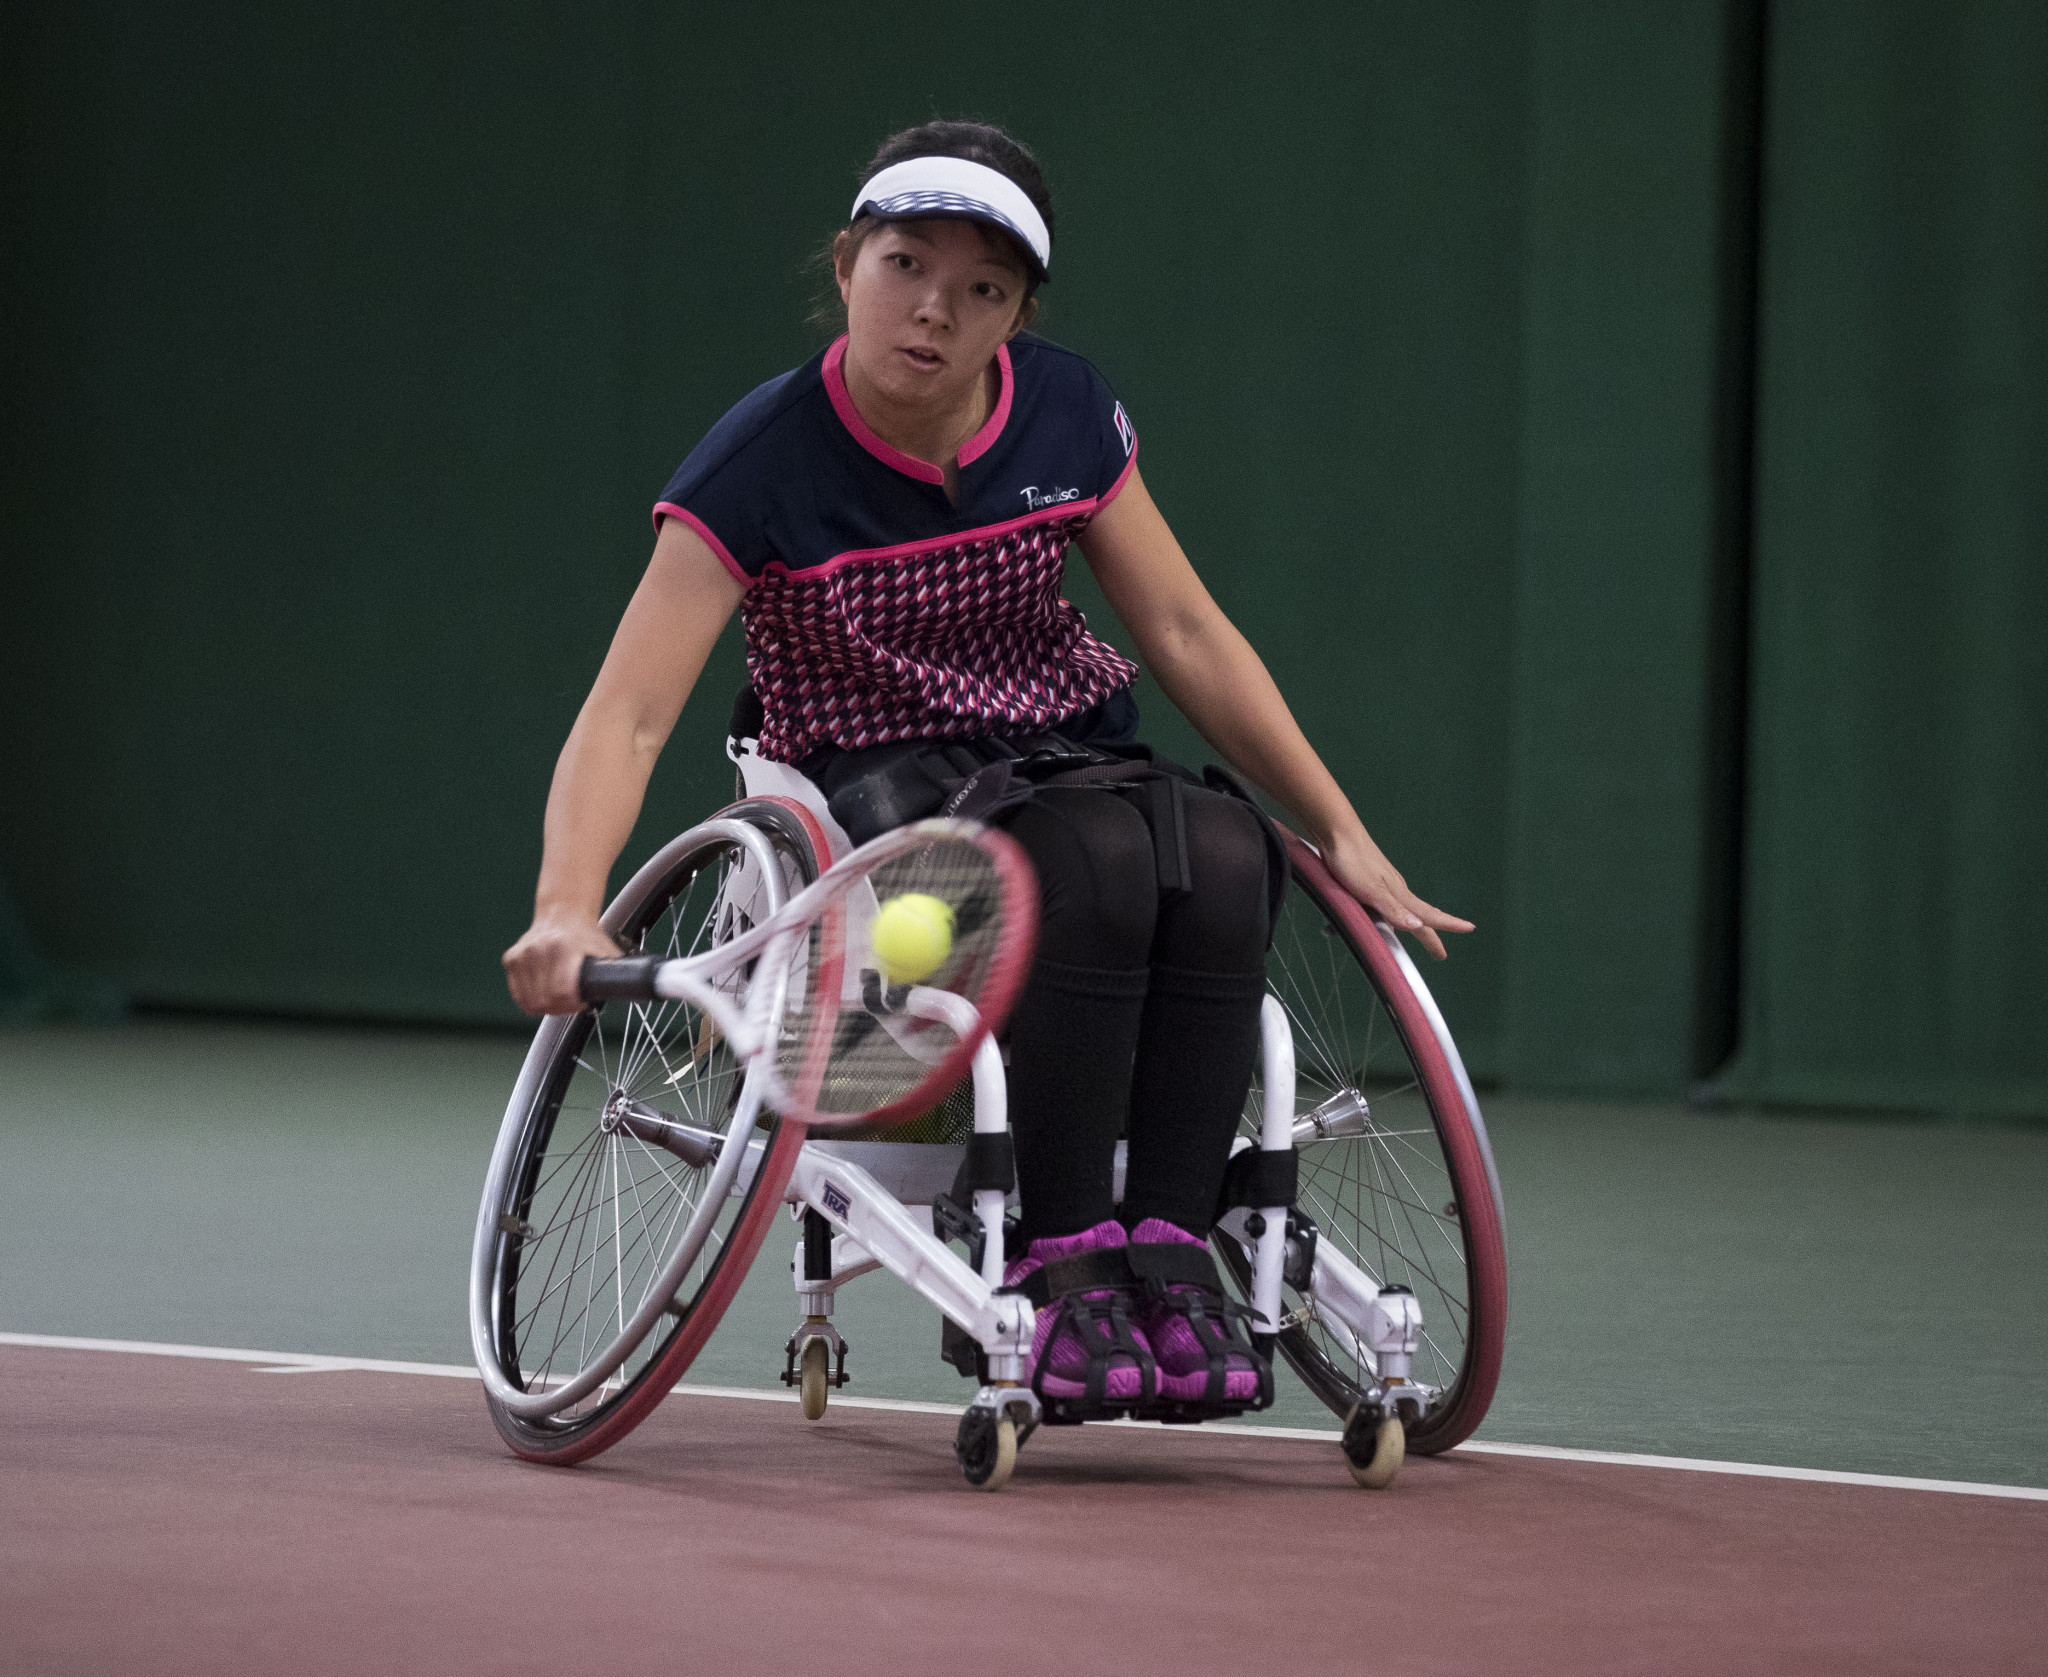 Japan's Manami Tanaka is among the players through to the quarter-finals of the women's singles event ©Getty Images